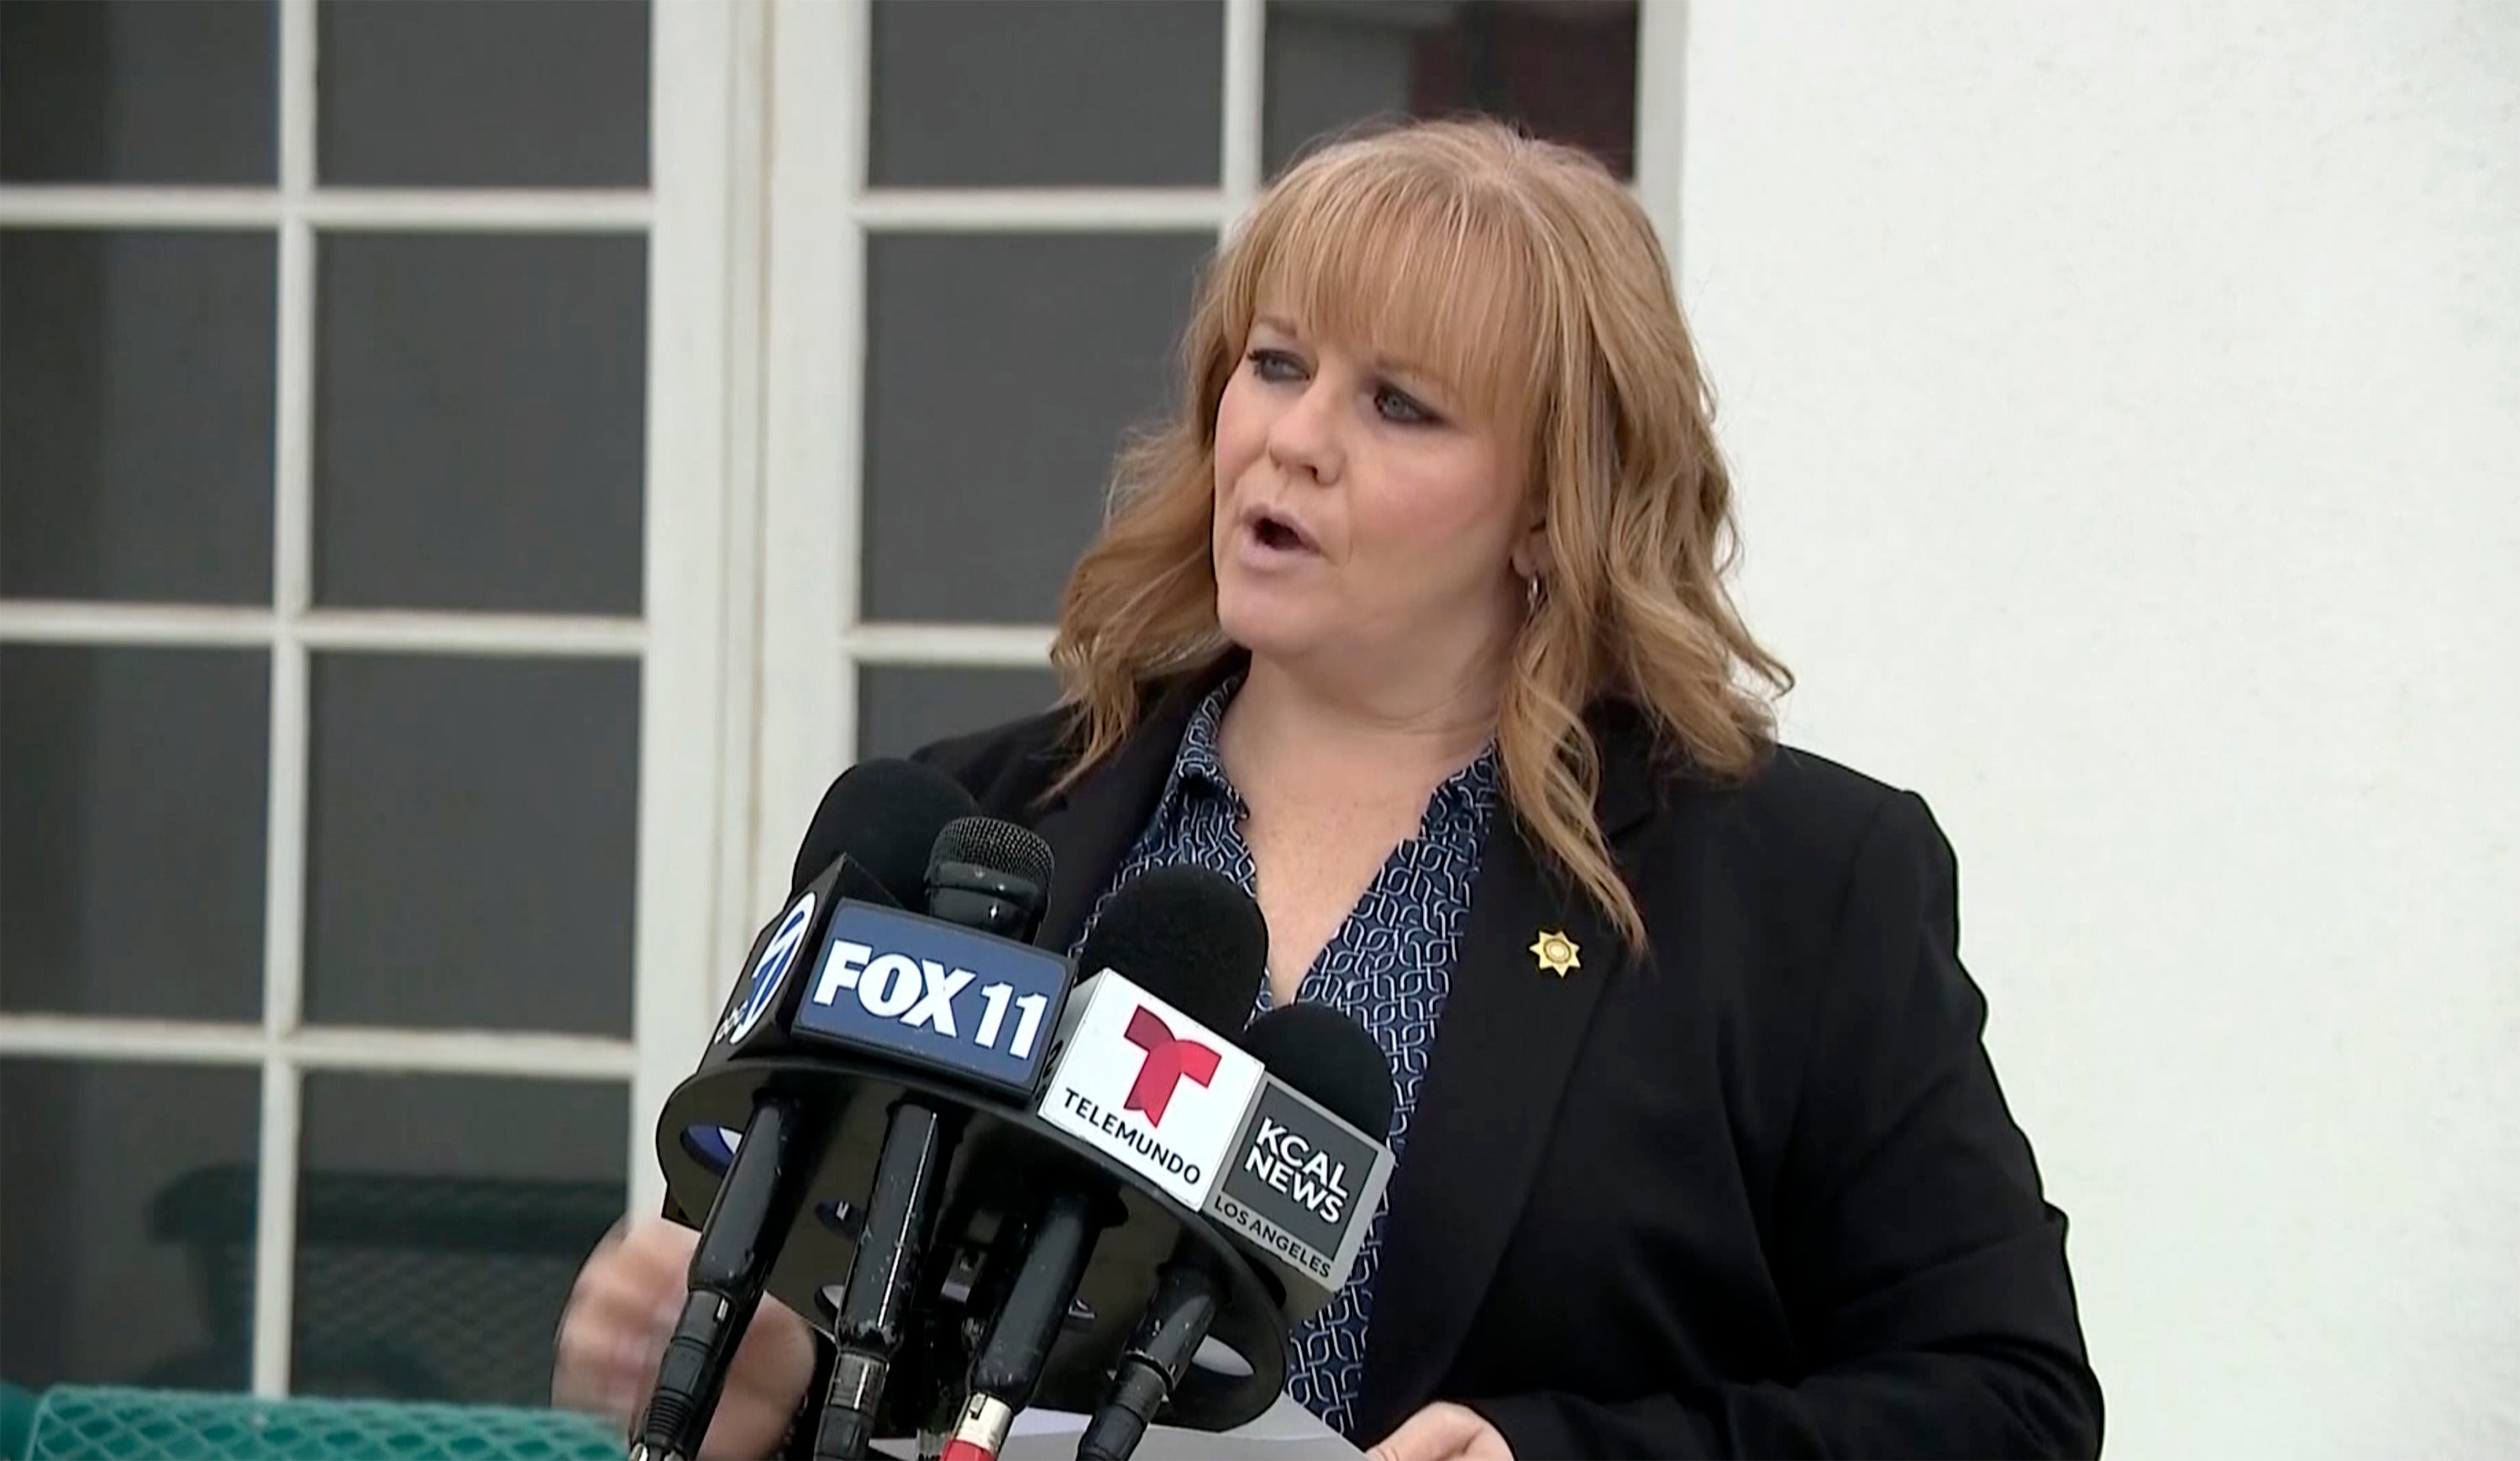 San Bernardino County Sheriff’s spokesperson, Mara Rodriguez giving an update after six people were found dead in a remote area of the Mojave desert last week